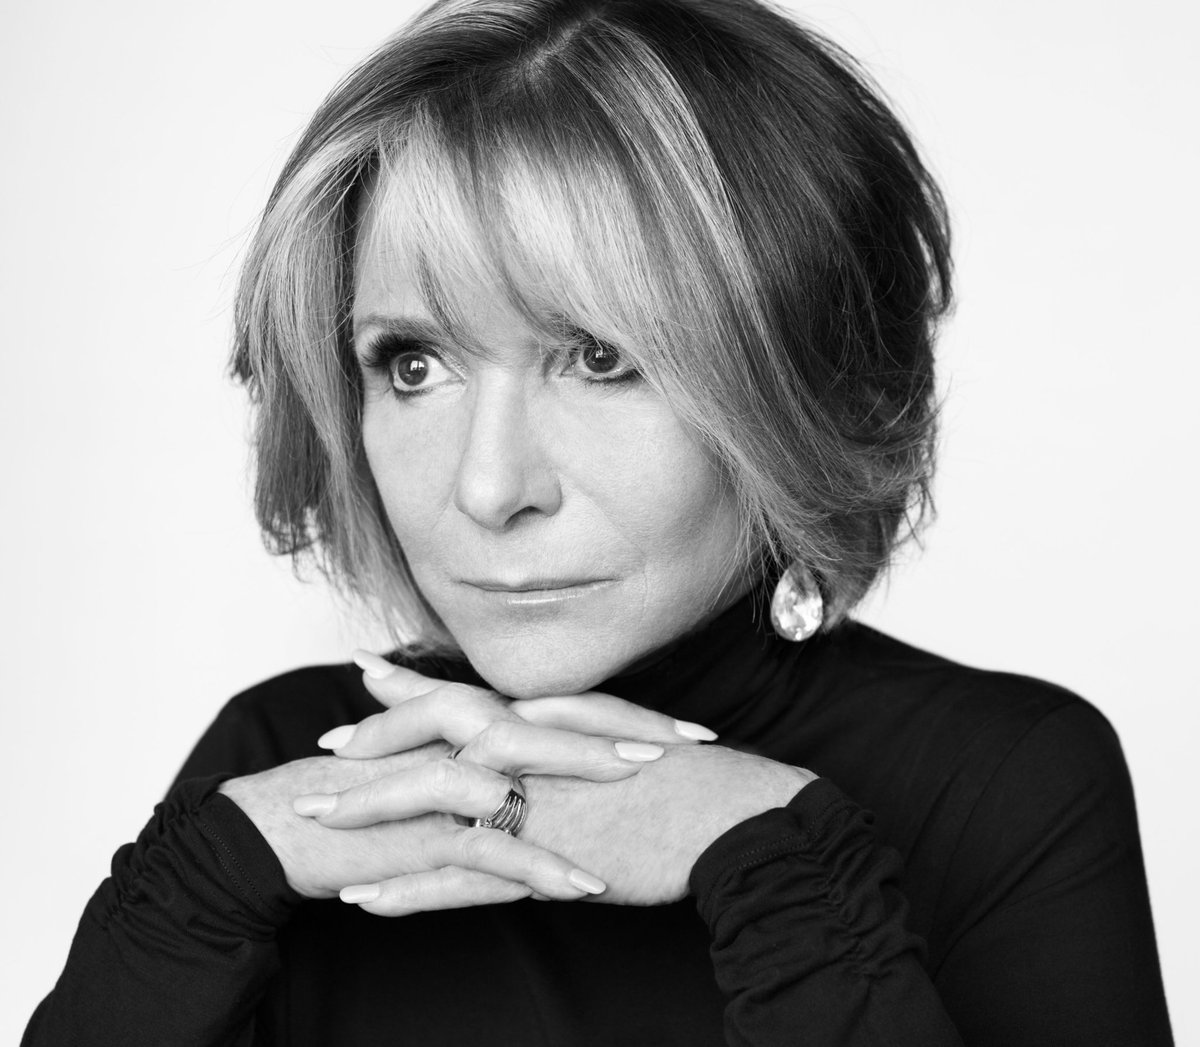 Happy Birthday to documentary legend @thesheilanevins, whose visionary leadership has shaped the decades of vital storytelling and nonfiction filmmaking.